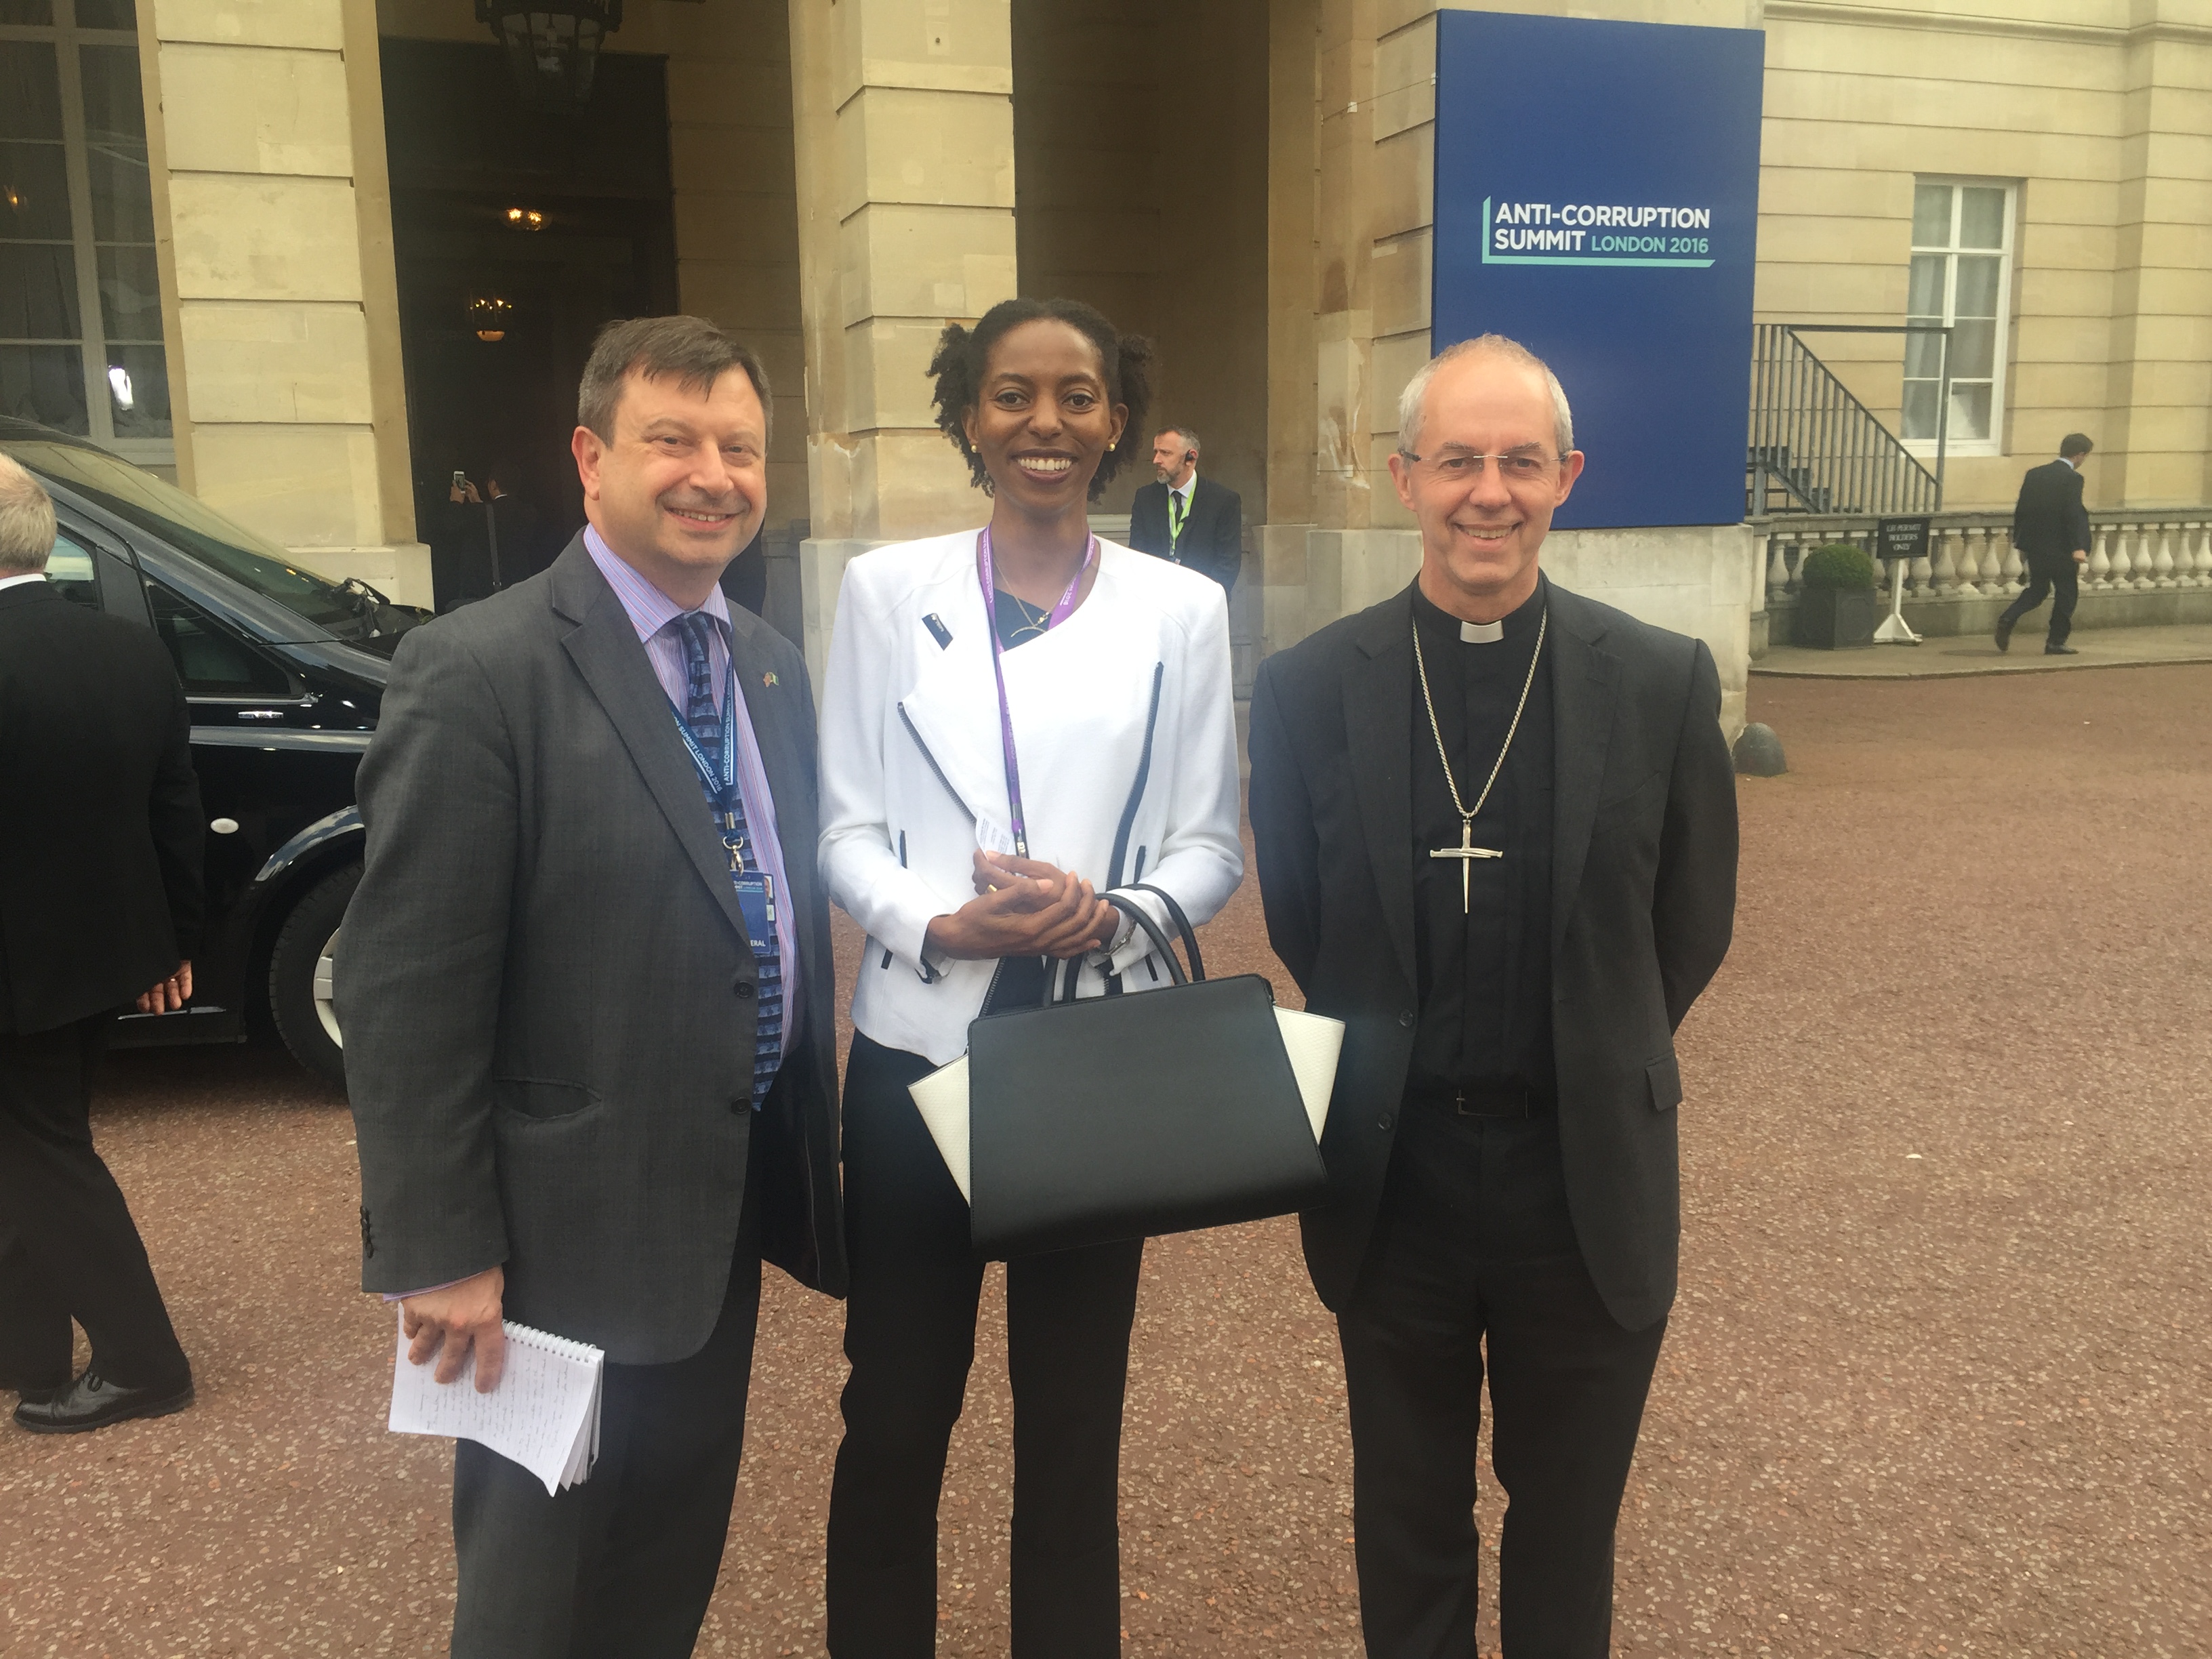 L-R: British High Commissioner to Nigeria, Paul Arkwright; Managing Director, Lagos Deep Offshore Logistics (LADOL), Dr. Amy Jadesimi and the Archbishop of Canterbury, The Most Revd Justin Welby, at the anti-corruption summit hosted by British Prime Minister David Cameron in London on Thursday. 